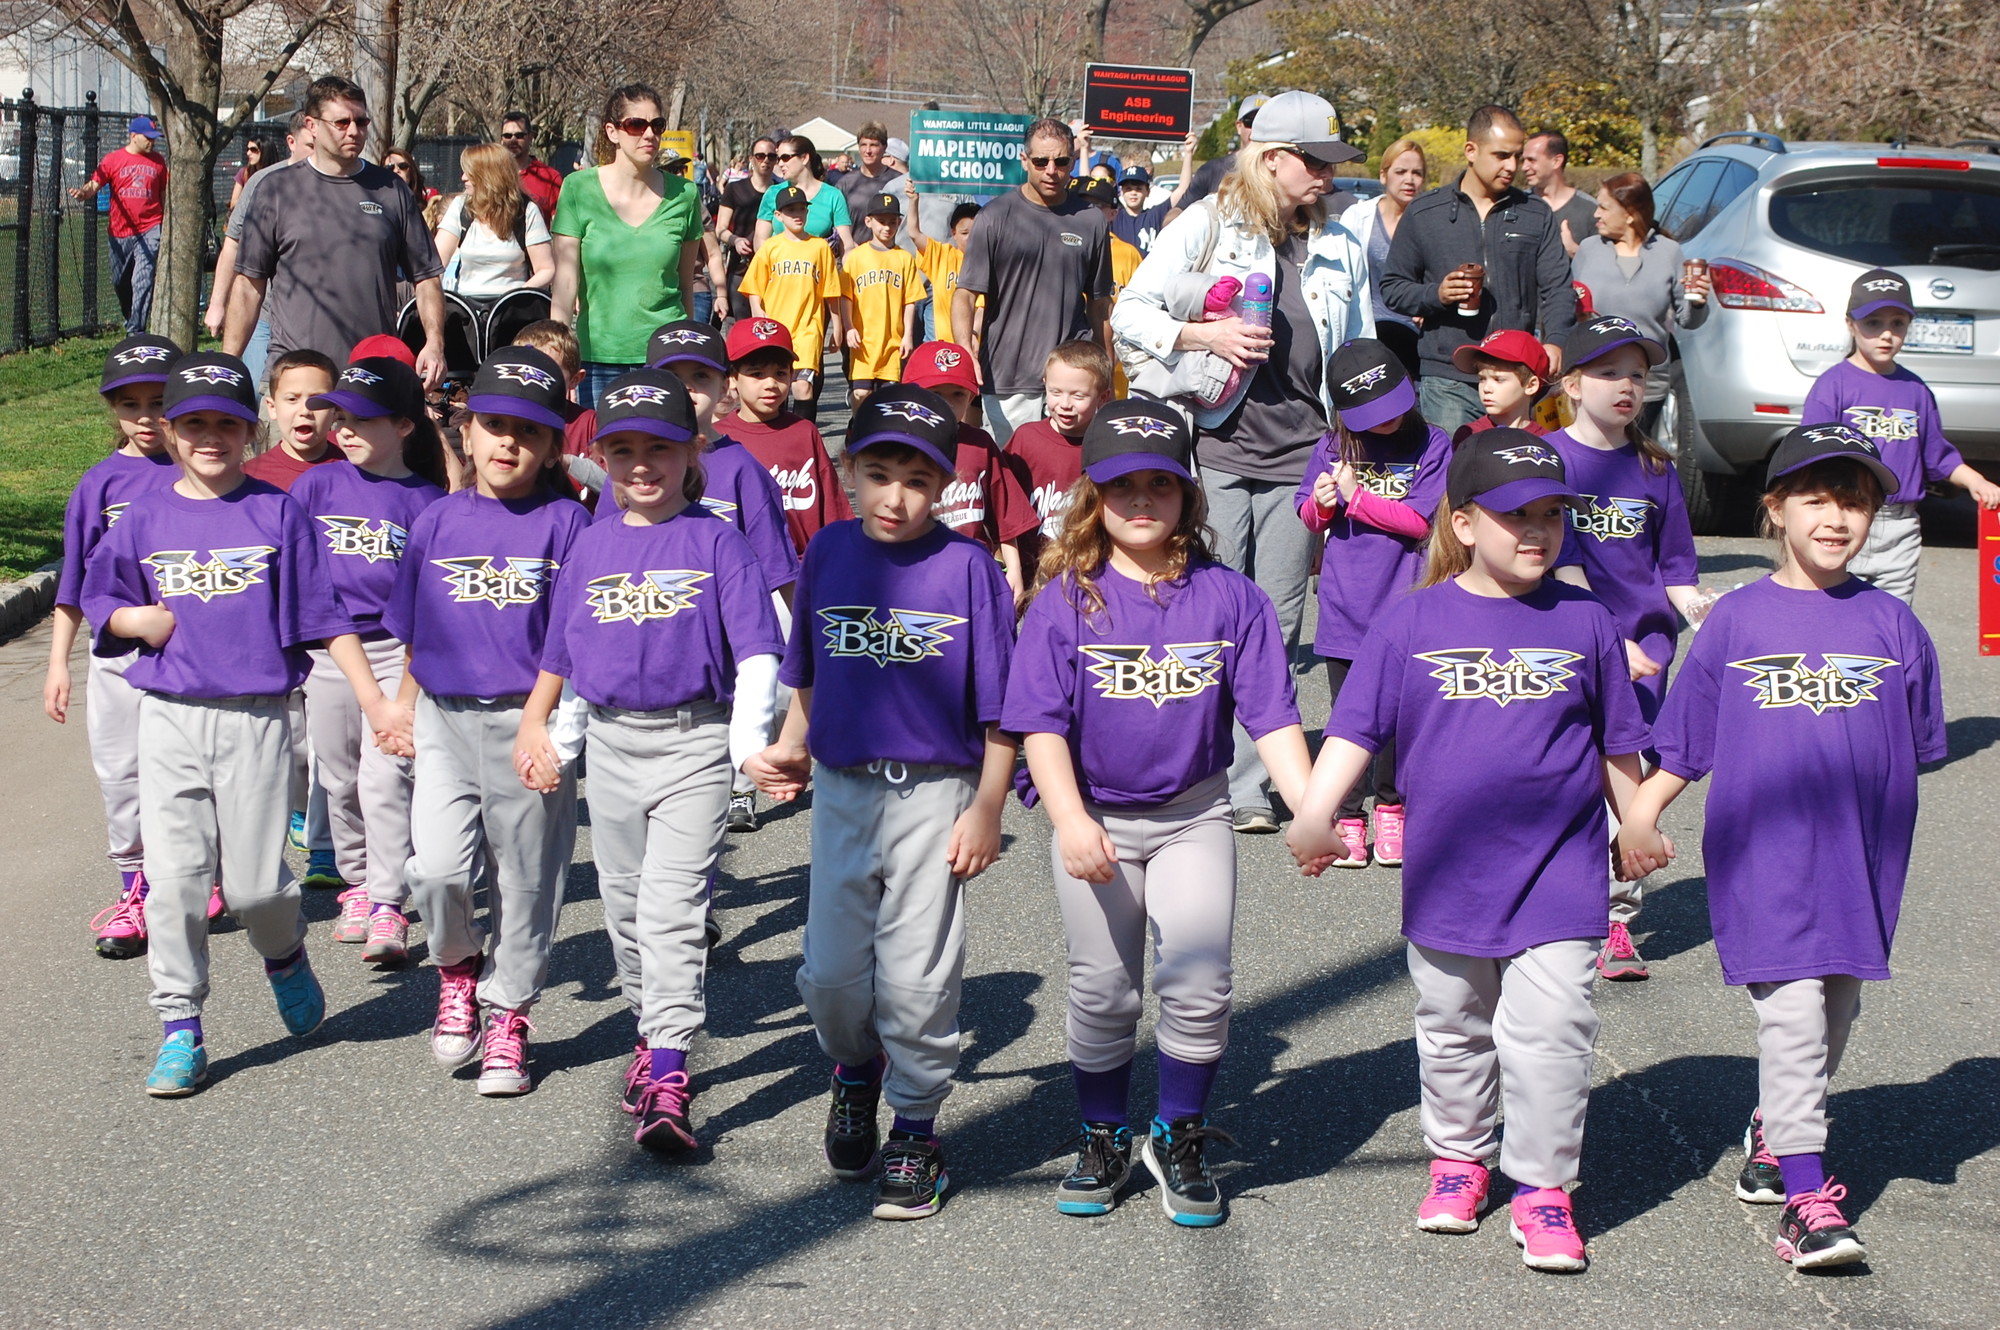 Members of the Bats marched down Demott Street on their way to Ciminelli Field for the Wantagh Little League’s Opening Day ceremony last Saturday morning.